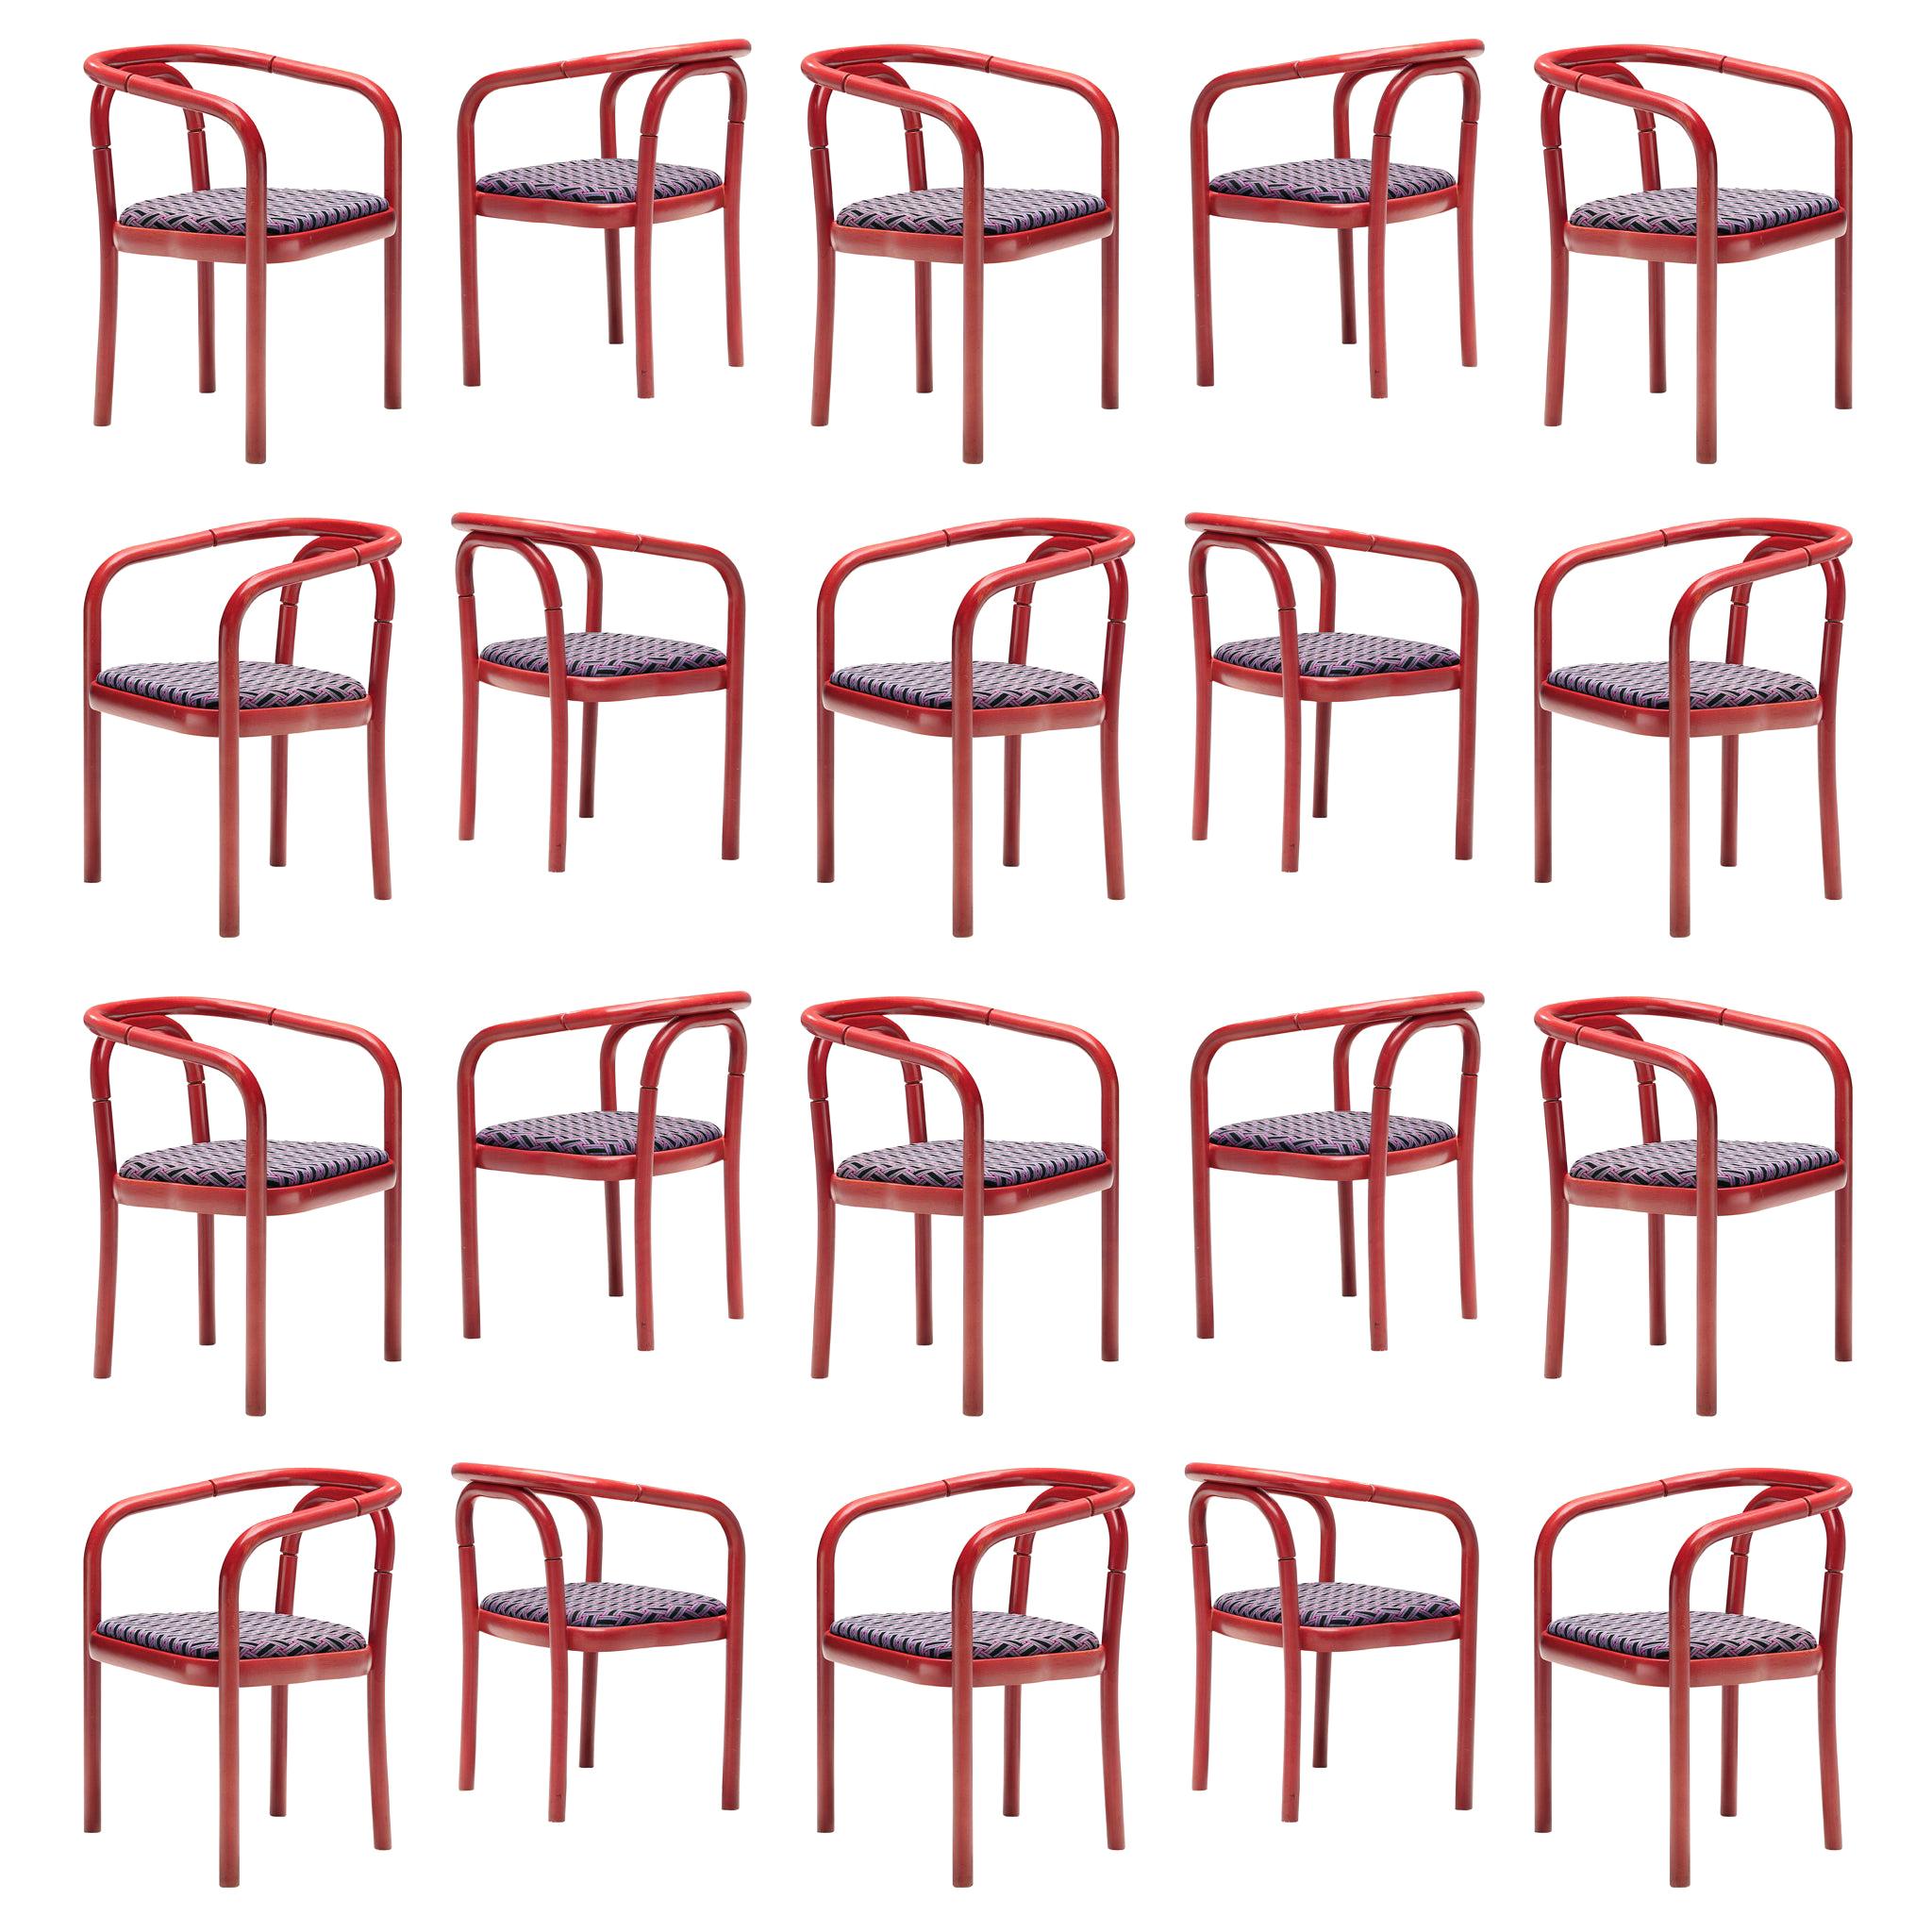 Large Set of Ton Chairs with Red Wooden Frames +75